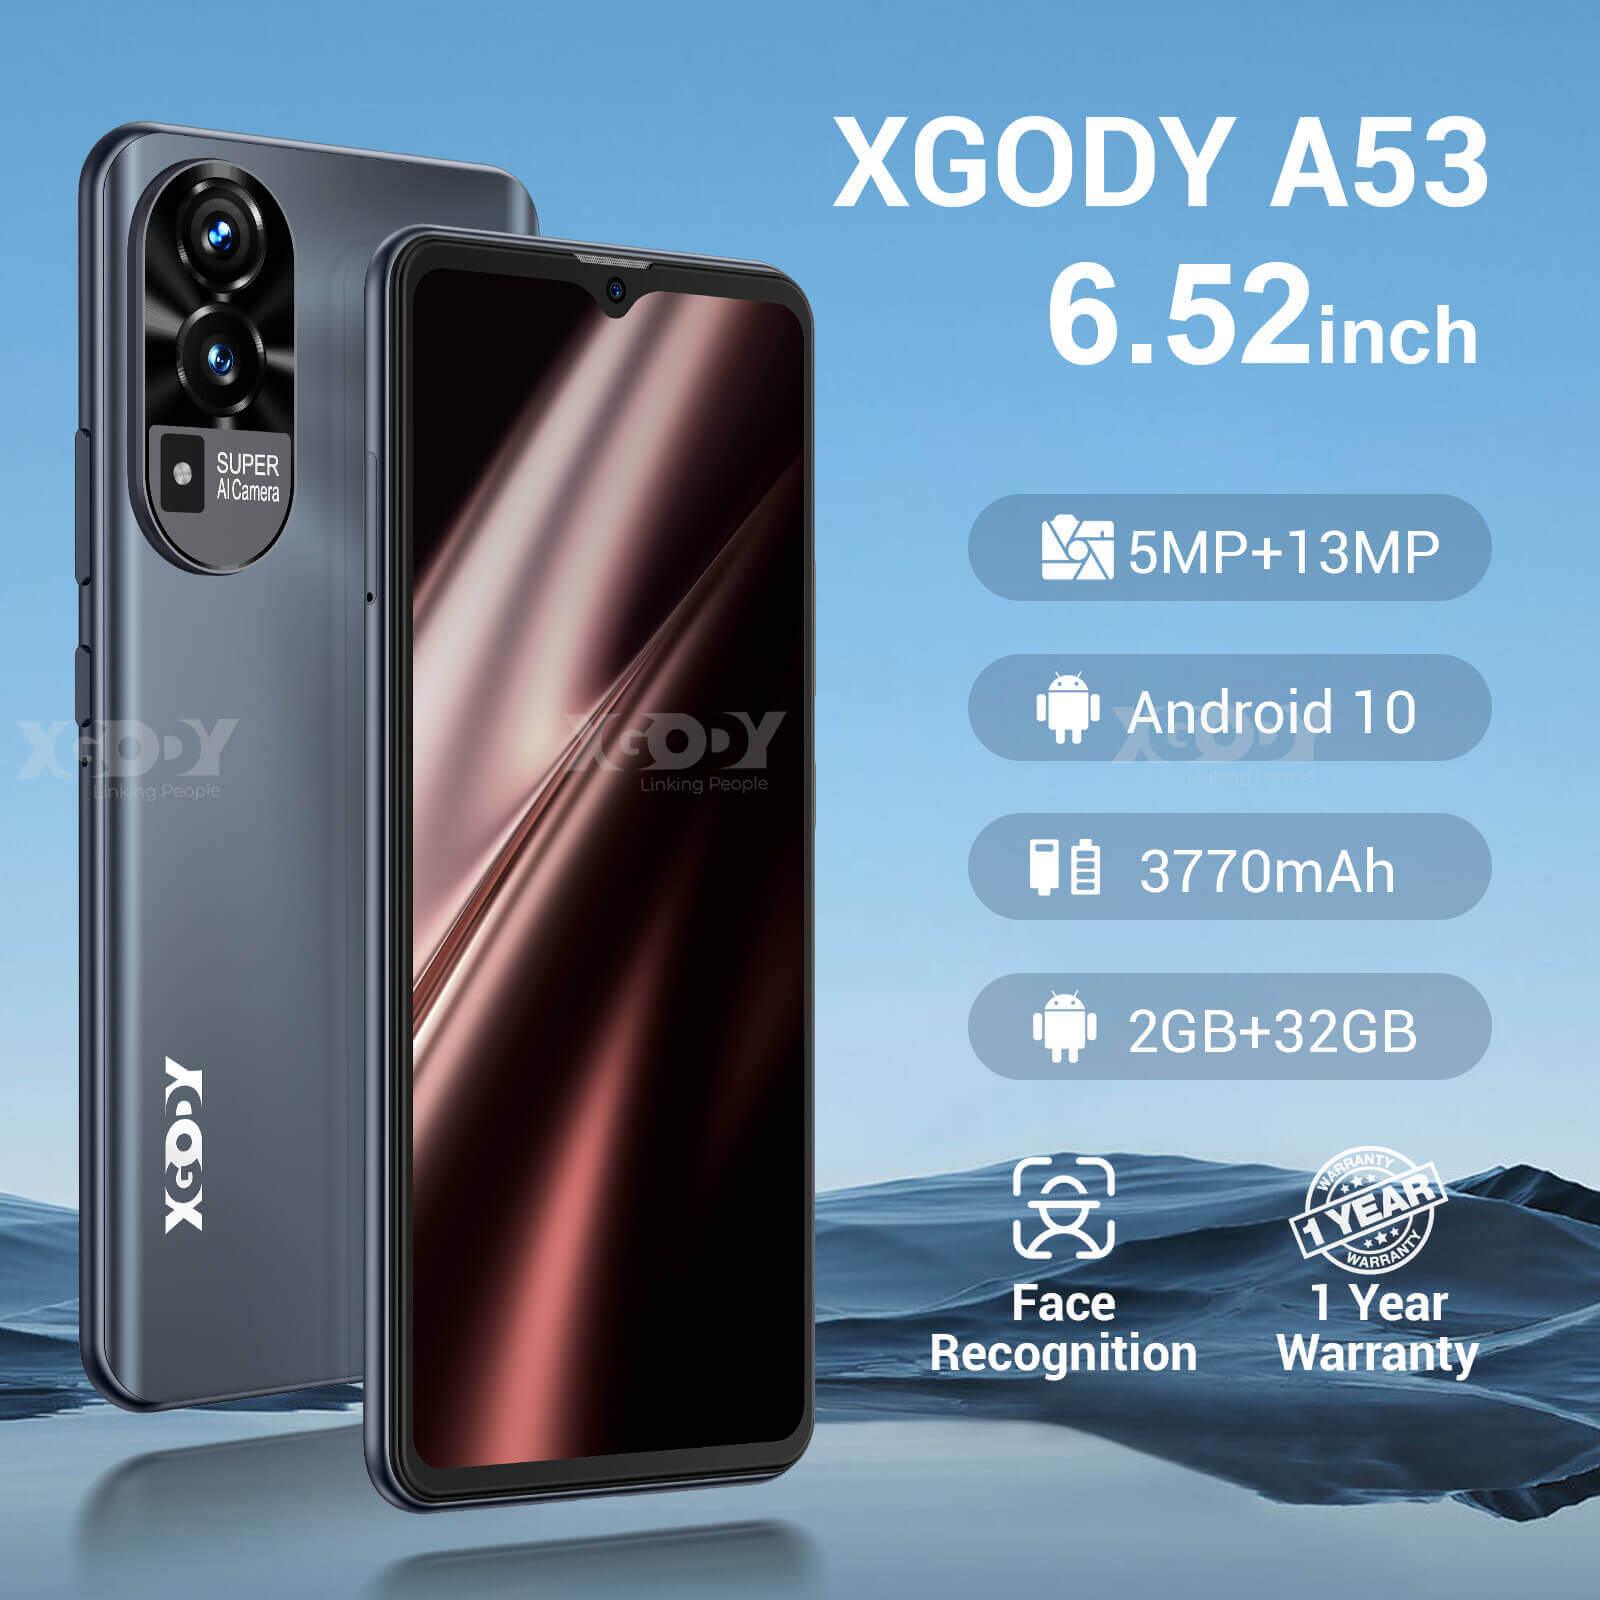 Cost-effective and Most worthwhile XGODY A53 Cellphone | 6.5" HD Display, Android 10.0, Dual Cameras, Face Unlock - XGODY 